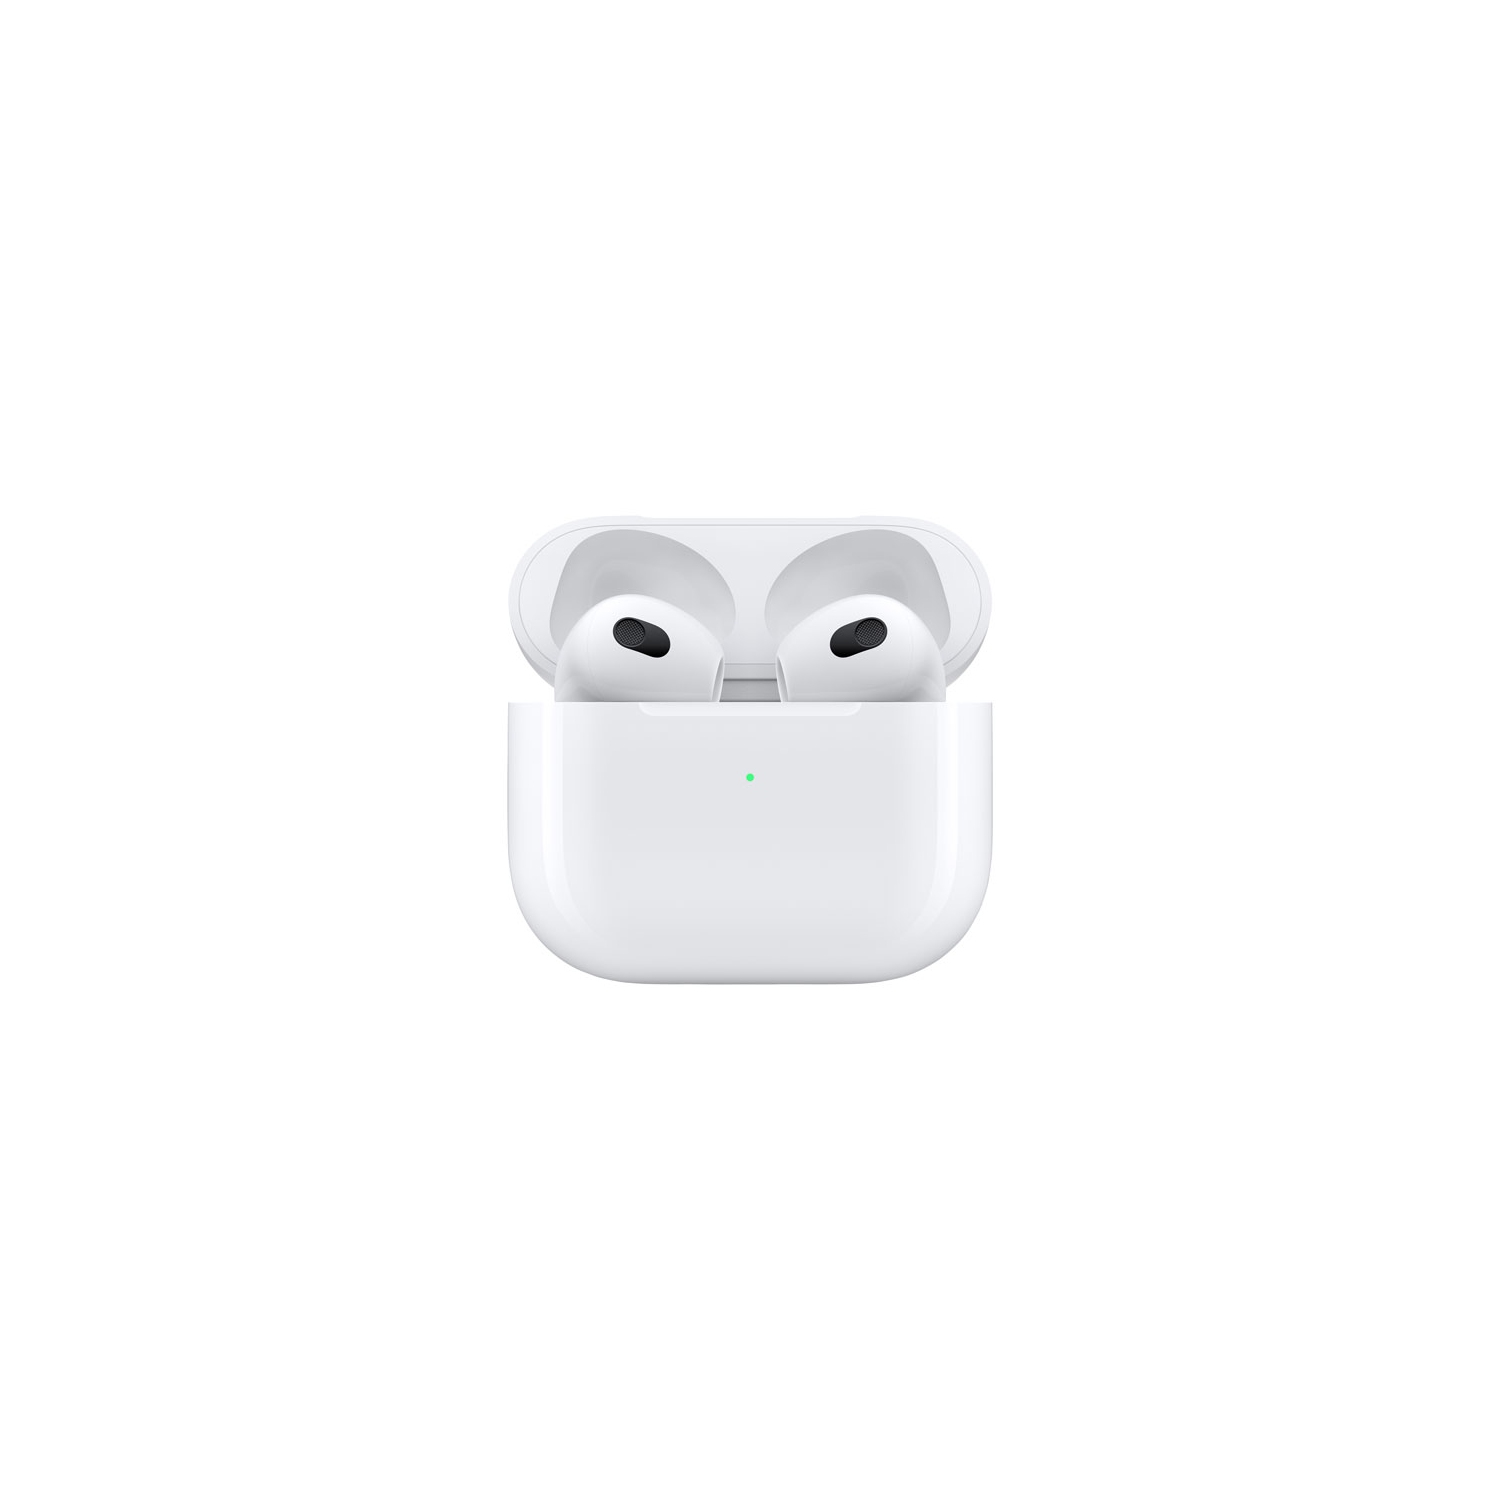 Refurbished (Excellent) - Apple AirPods (3rd generation) In-Ear True Wireless Earbuds with MagSafe Charging Case - White